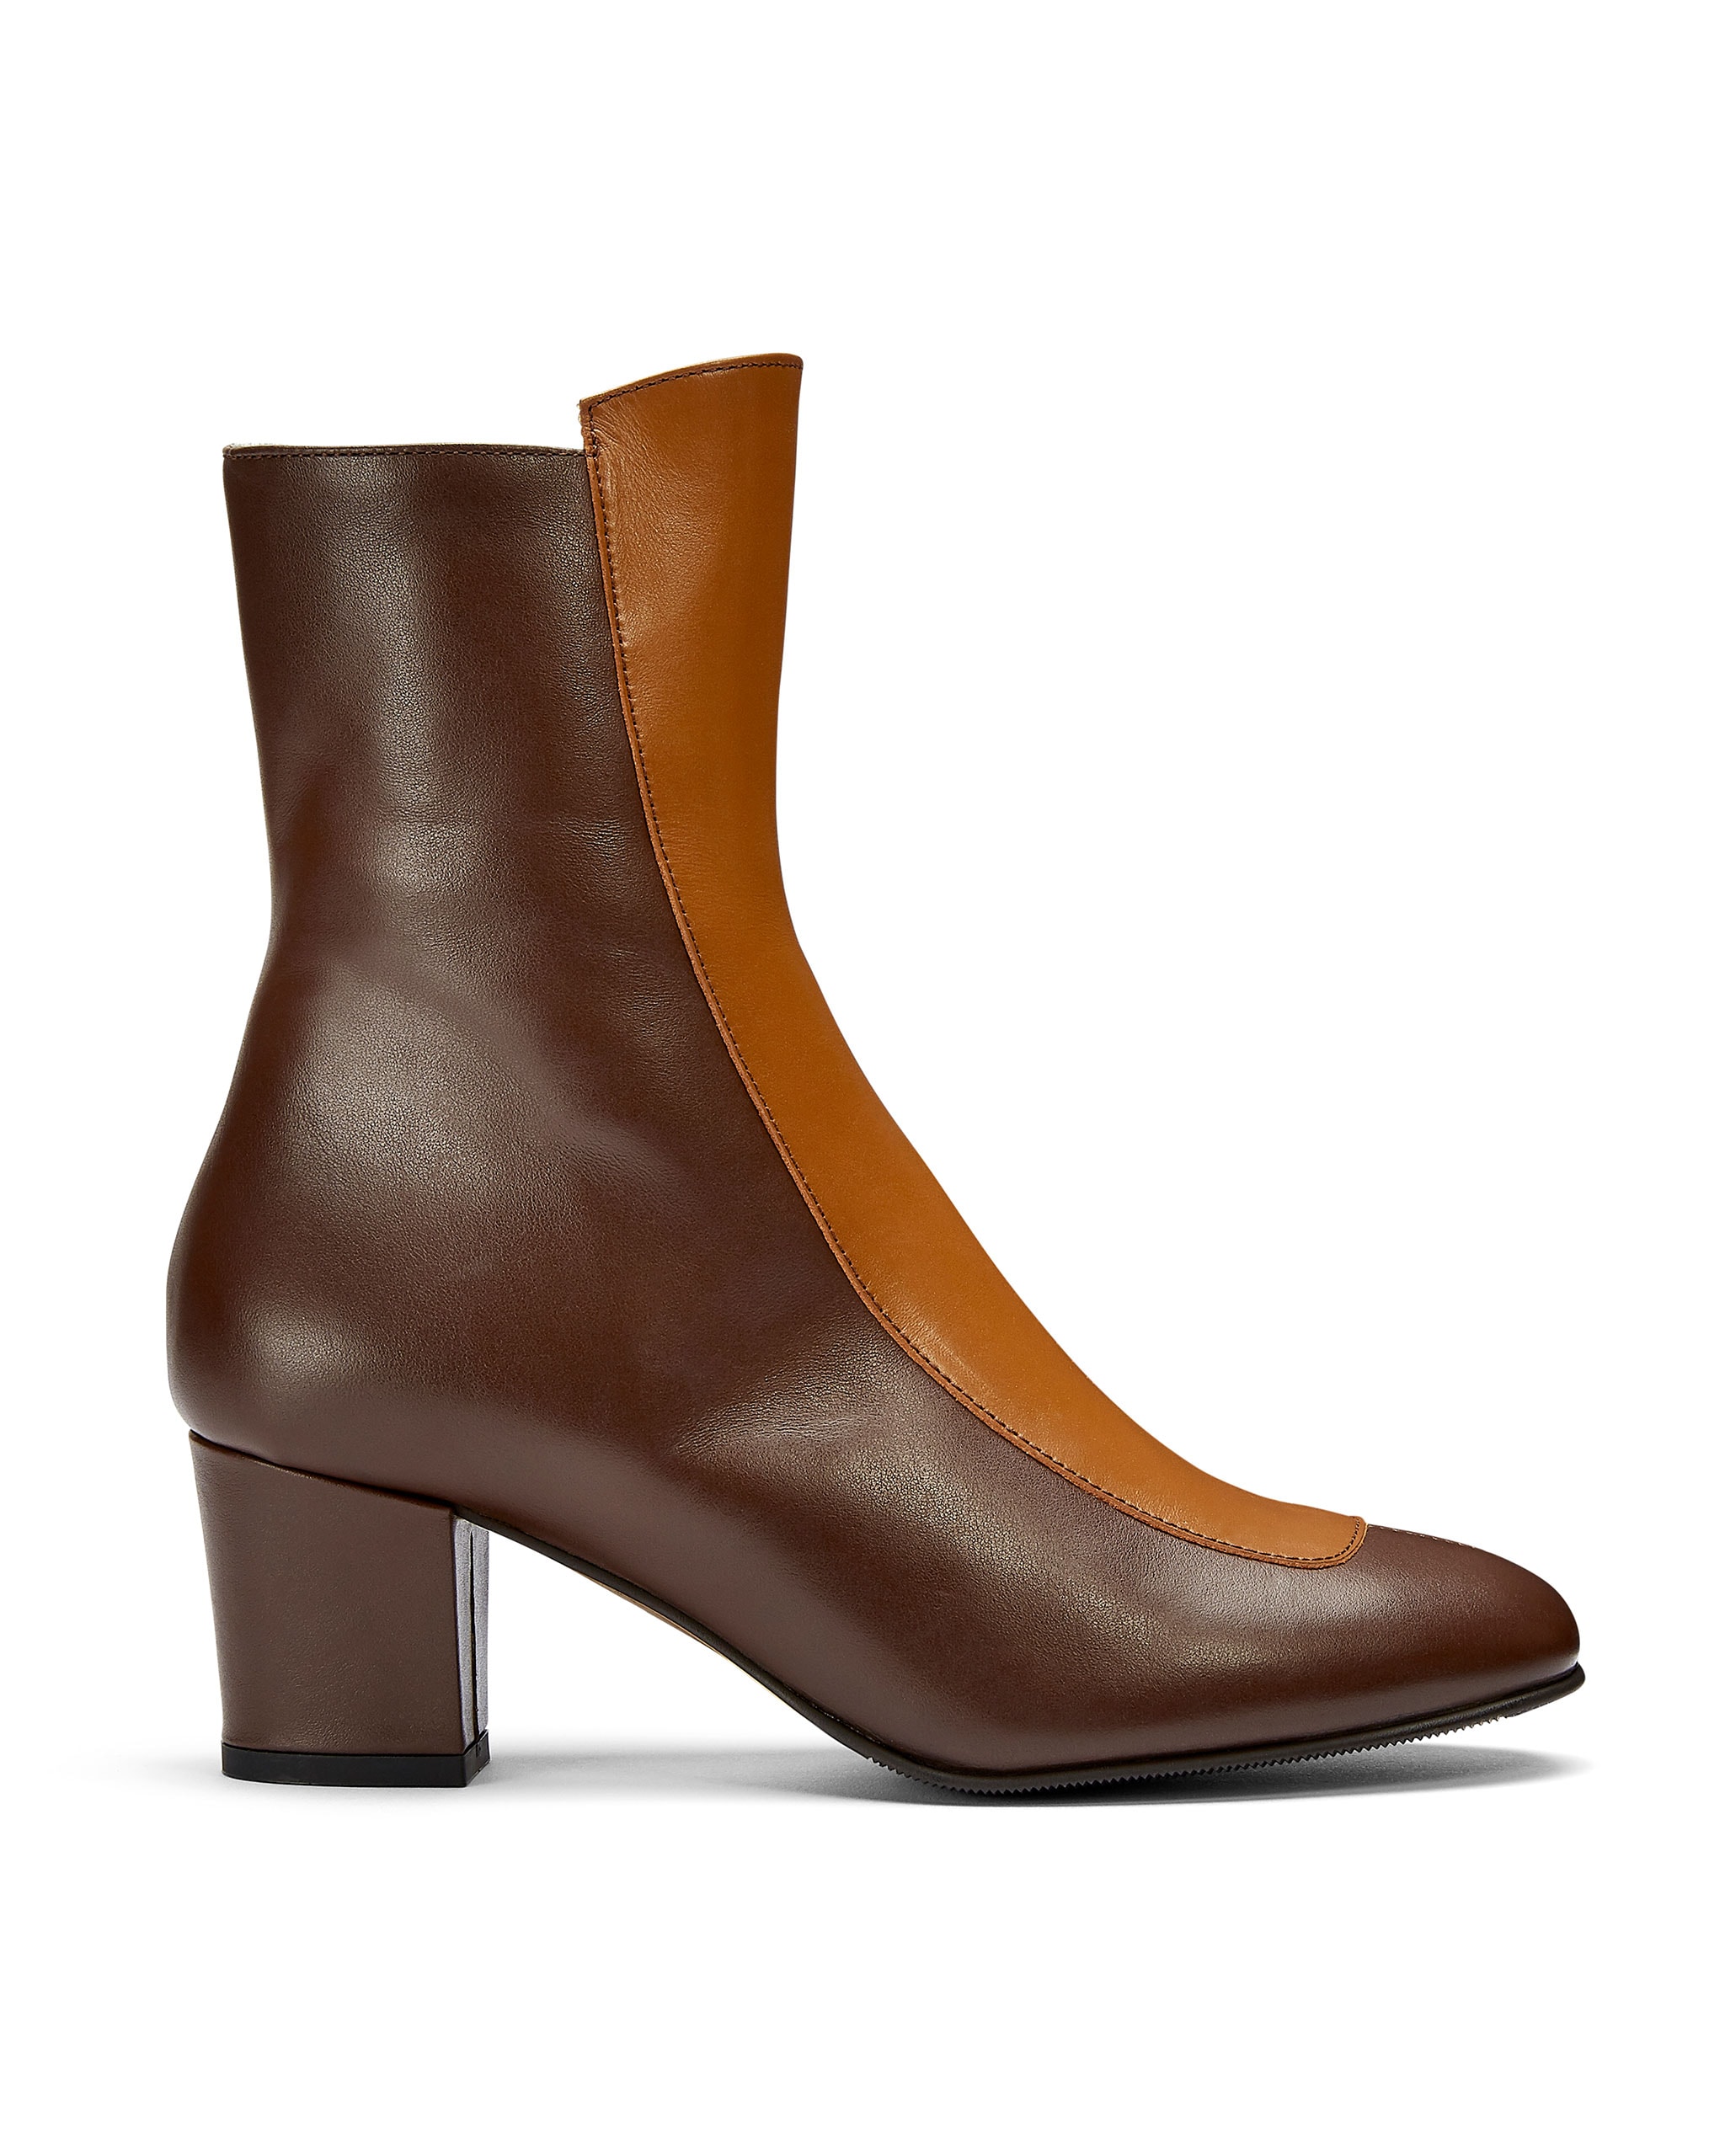 Ops&Ops No16 Curly Wurly duo-tone leather mid-heel boots, side view